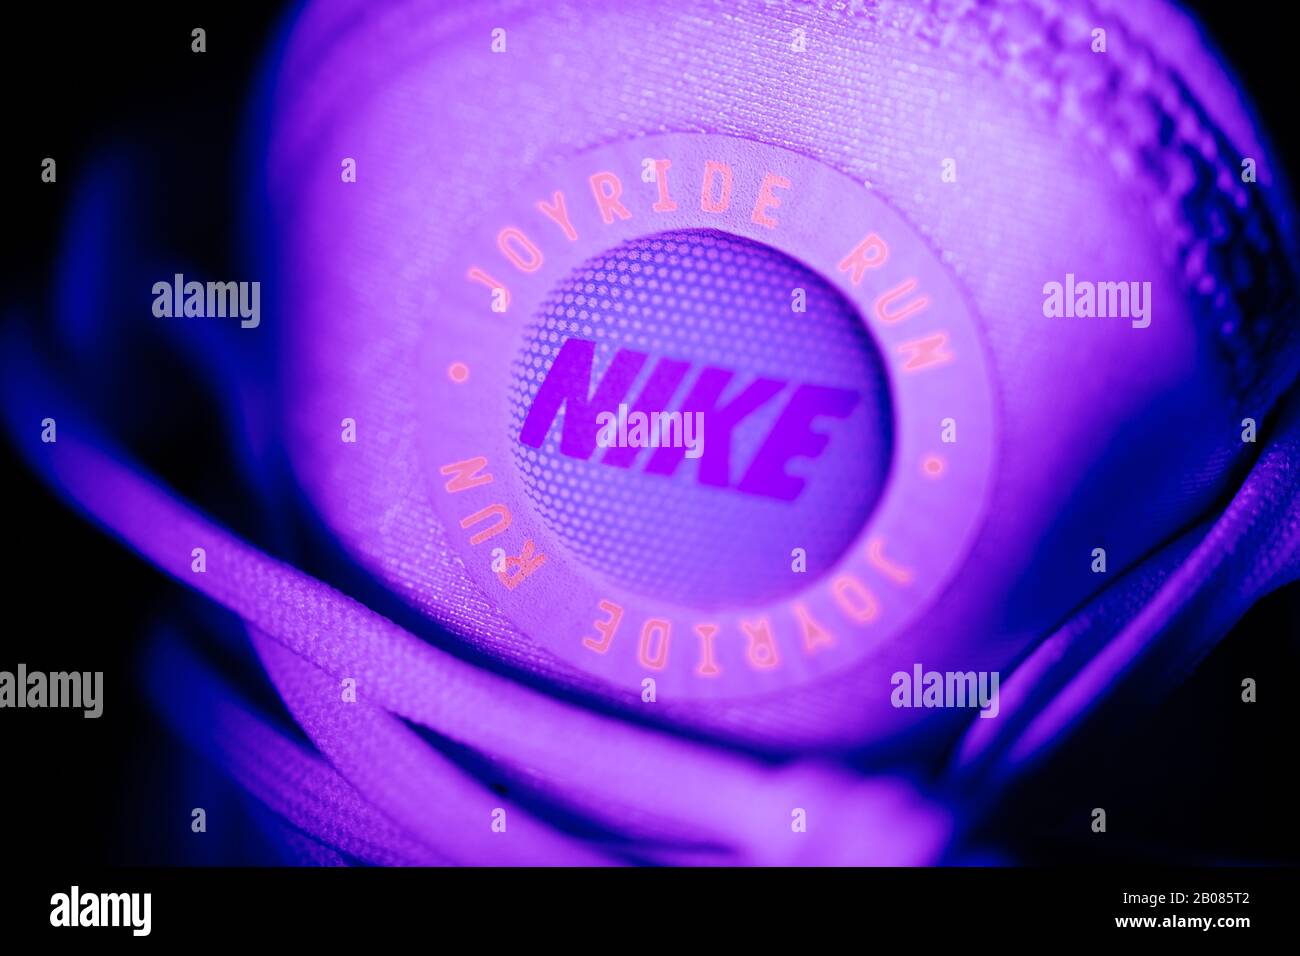 Paris, France - Jul 30, 2019: Close-up of NIke Joyride logotype on the front of latest innovation the Joyride running shoes with thousands of tiny beads for better support - neon modern colors Stock Photo